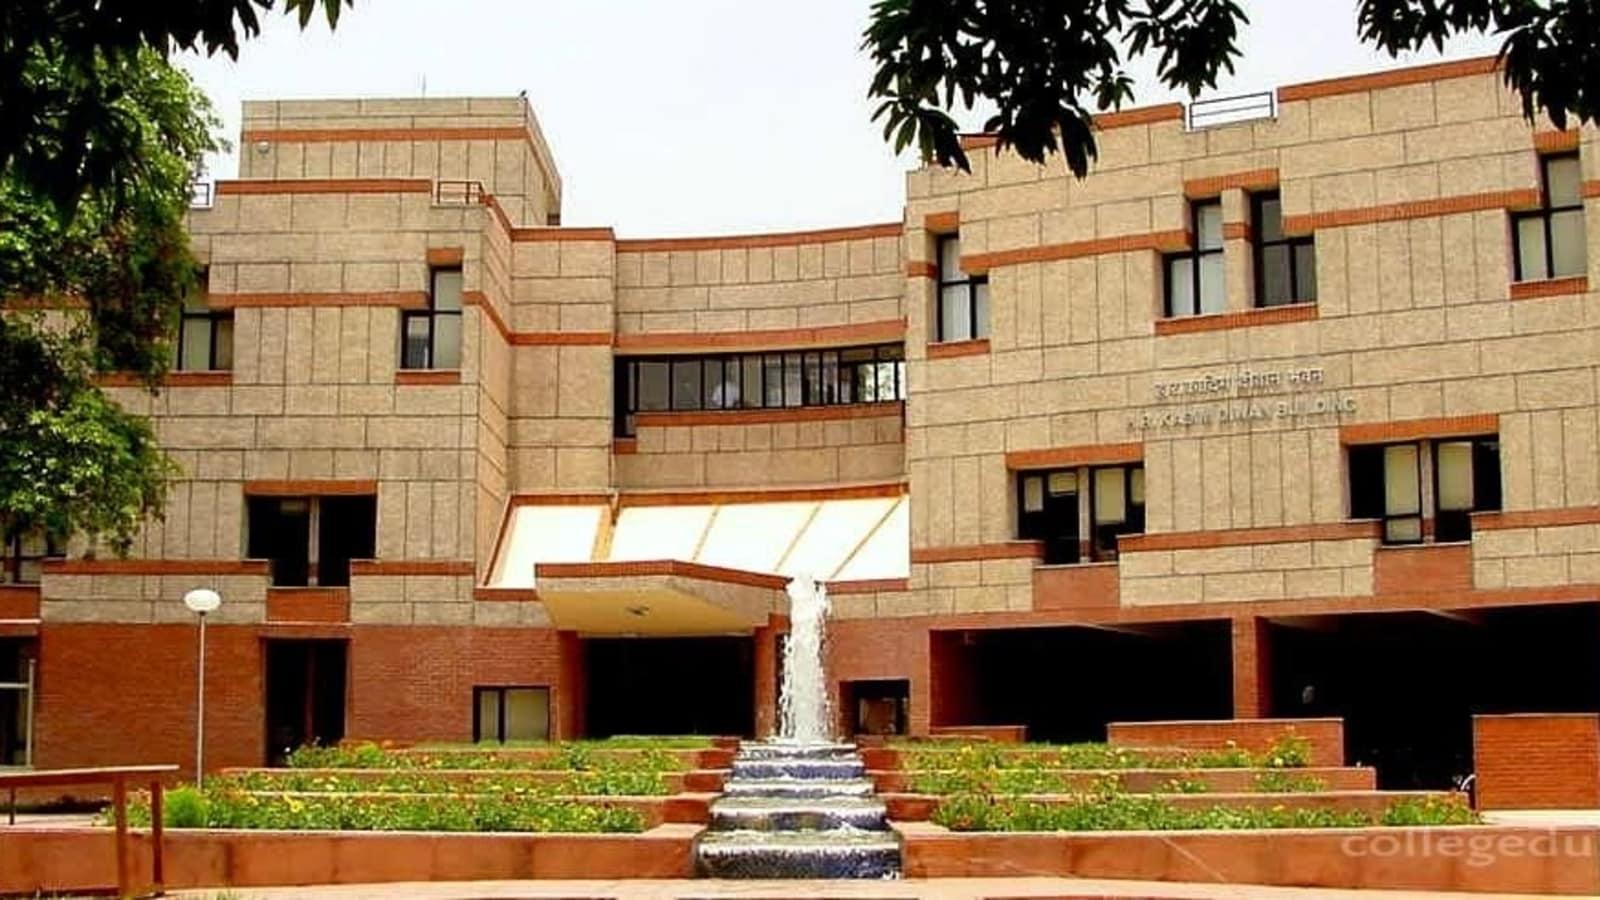 IIT Kanpur is best iit in the list of top IITs in India